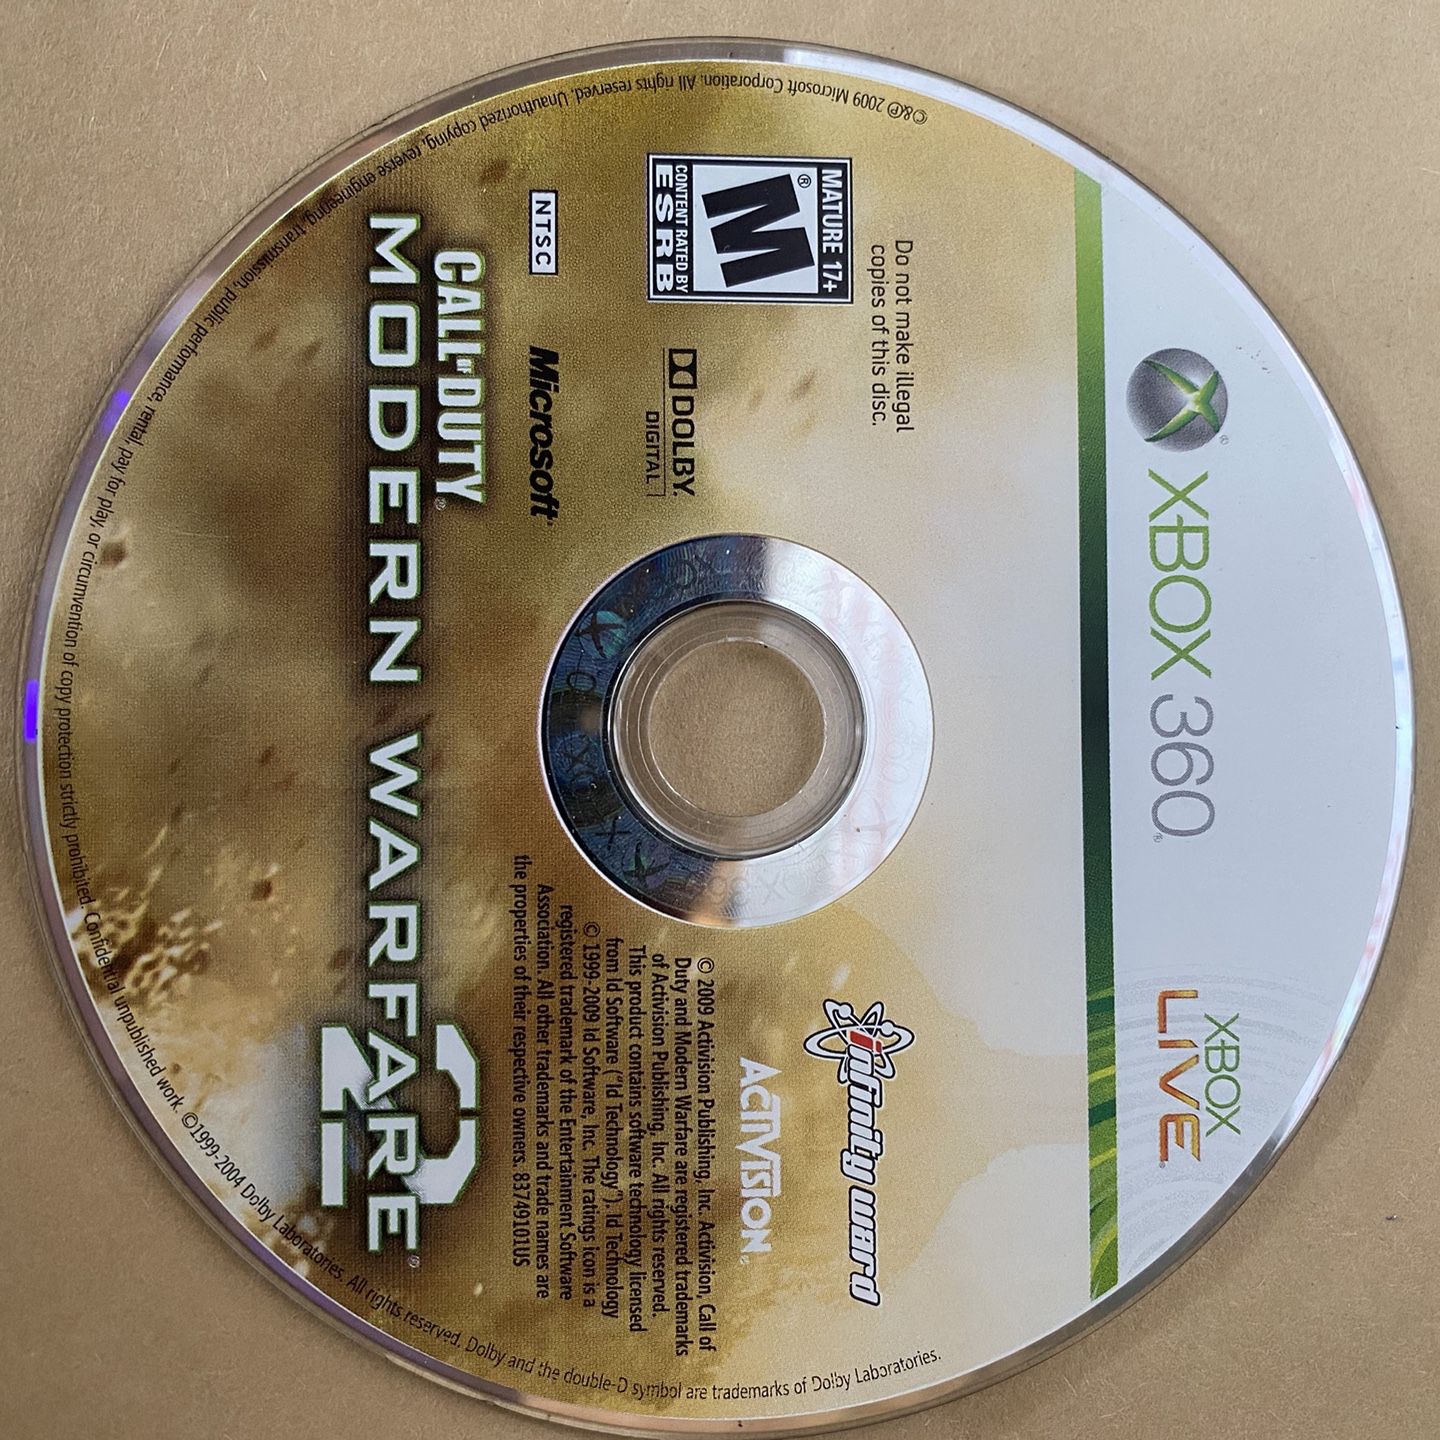 Xbox 360 Call Of Duty Modern Warfare 2 Video Game Disc in Case Rated M 17+